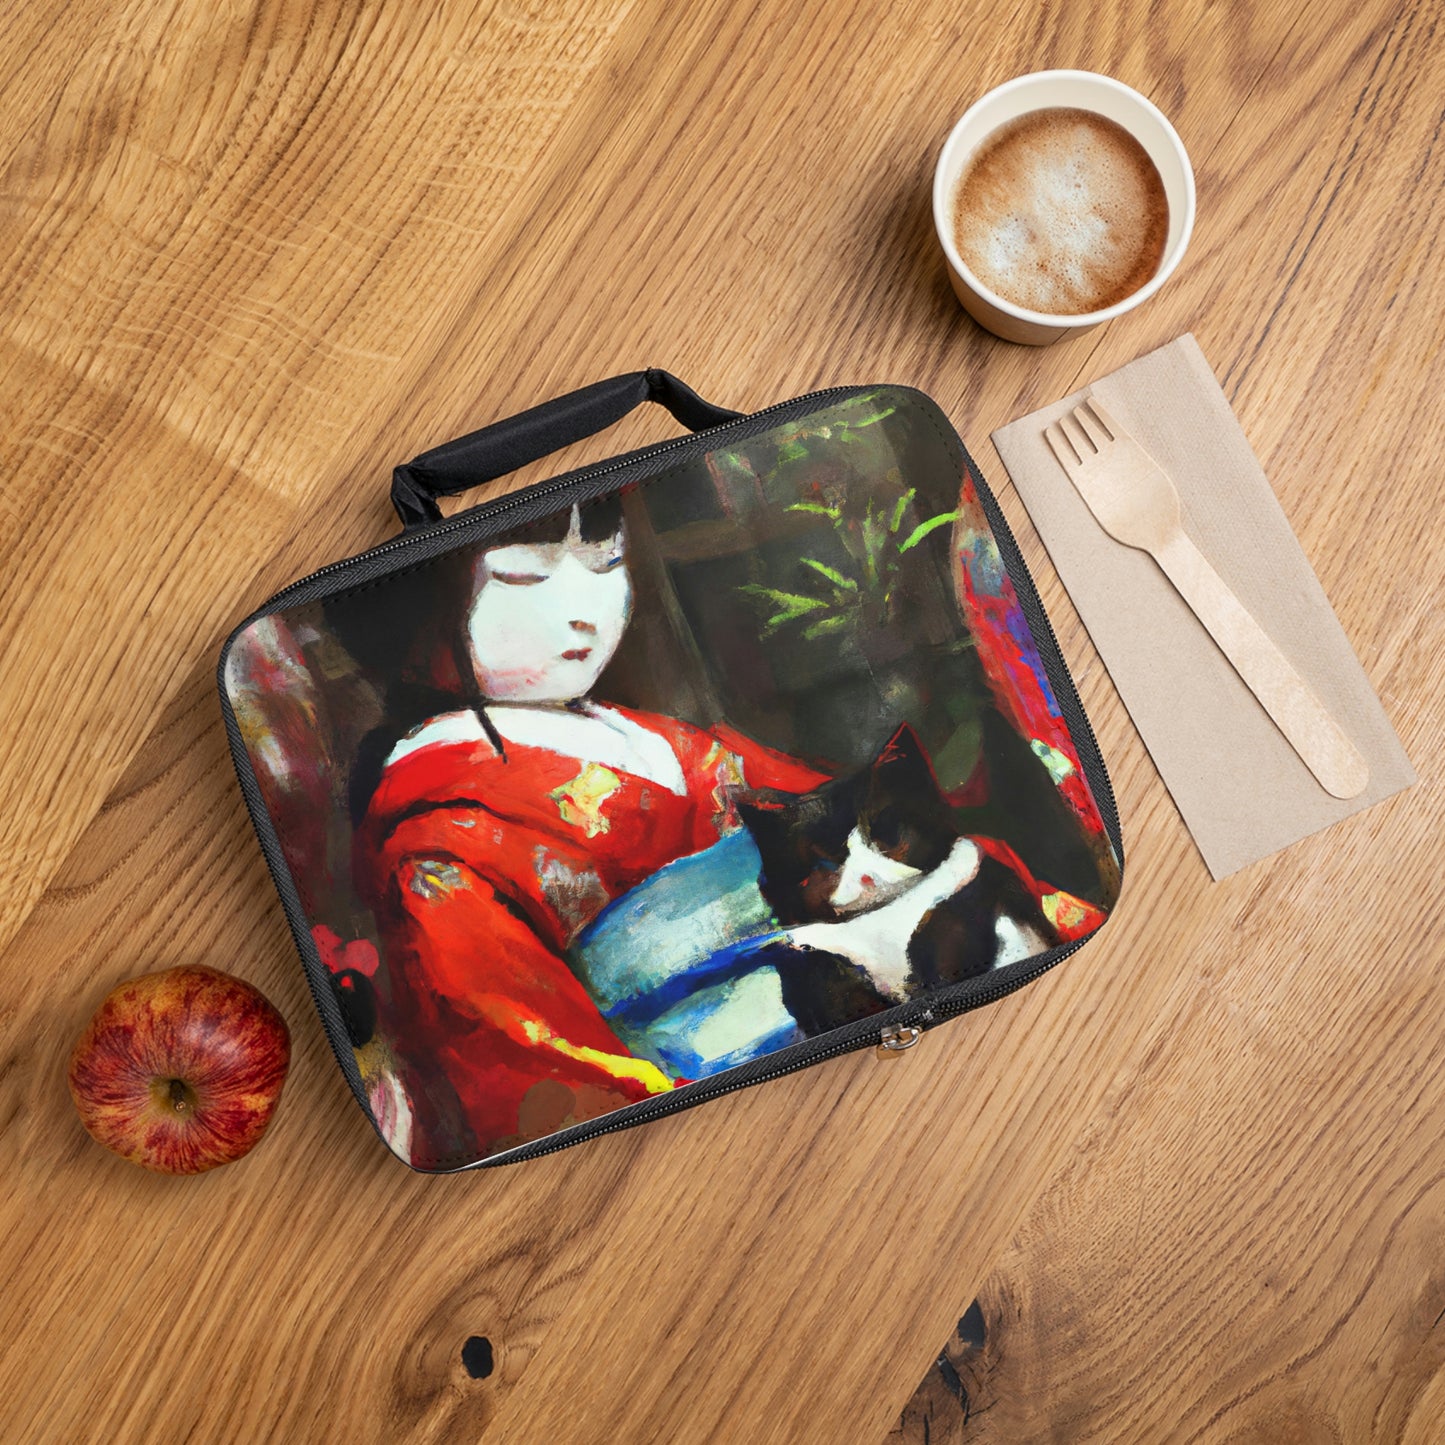 Geisha and cat Lunch Bag, maiko and cat lunch bag, Japanese feudal art lunch bag, back to school gift, Asian-inspired art lunch bag